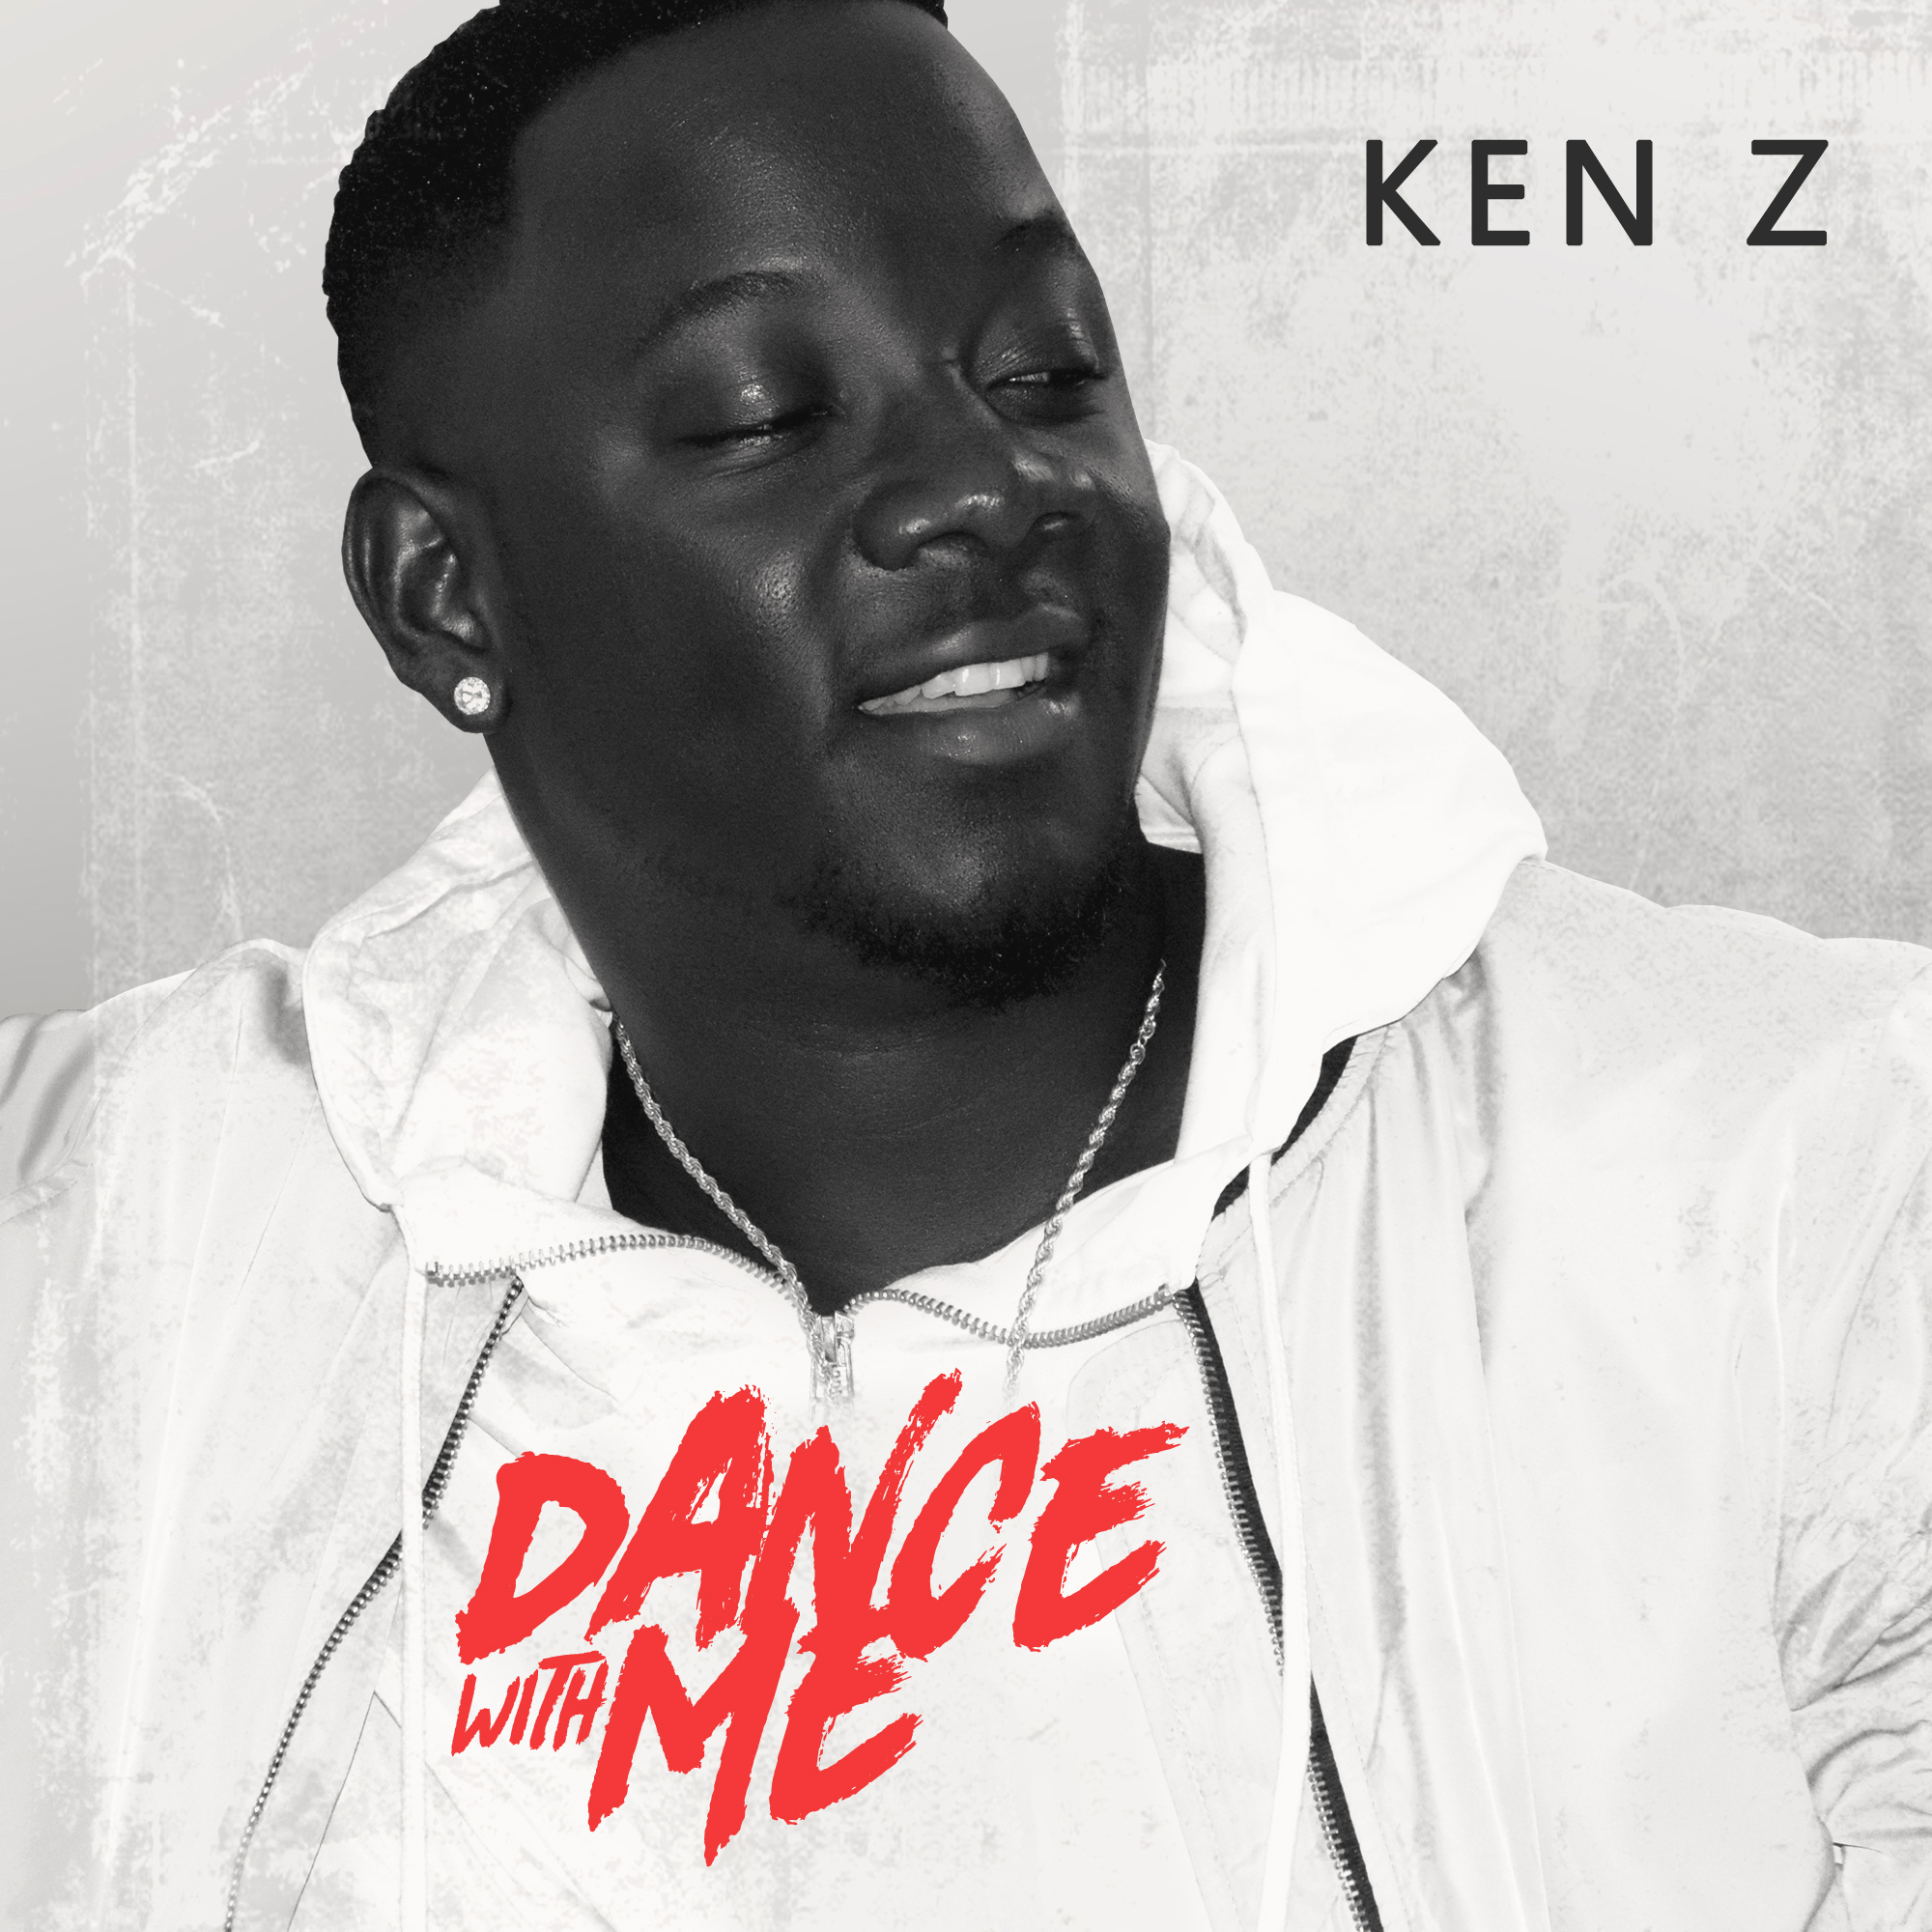 Ken Z – Dance With Me (Directed by Champion Studio)